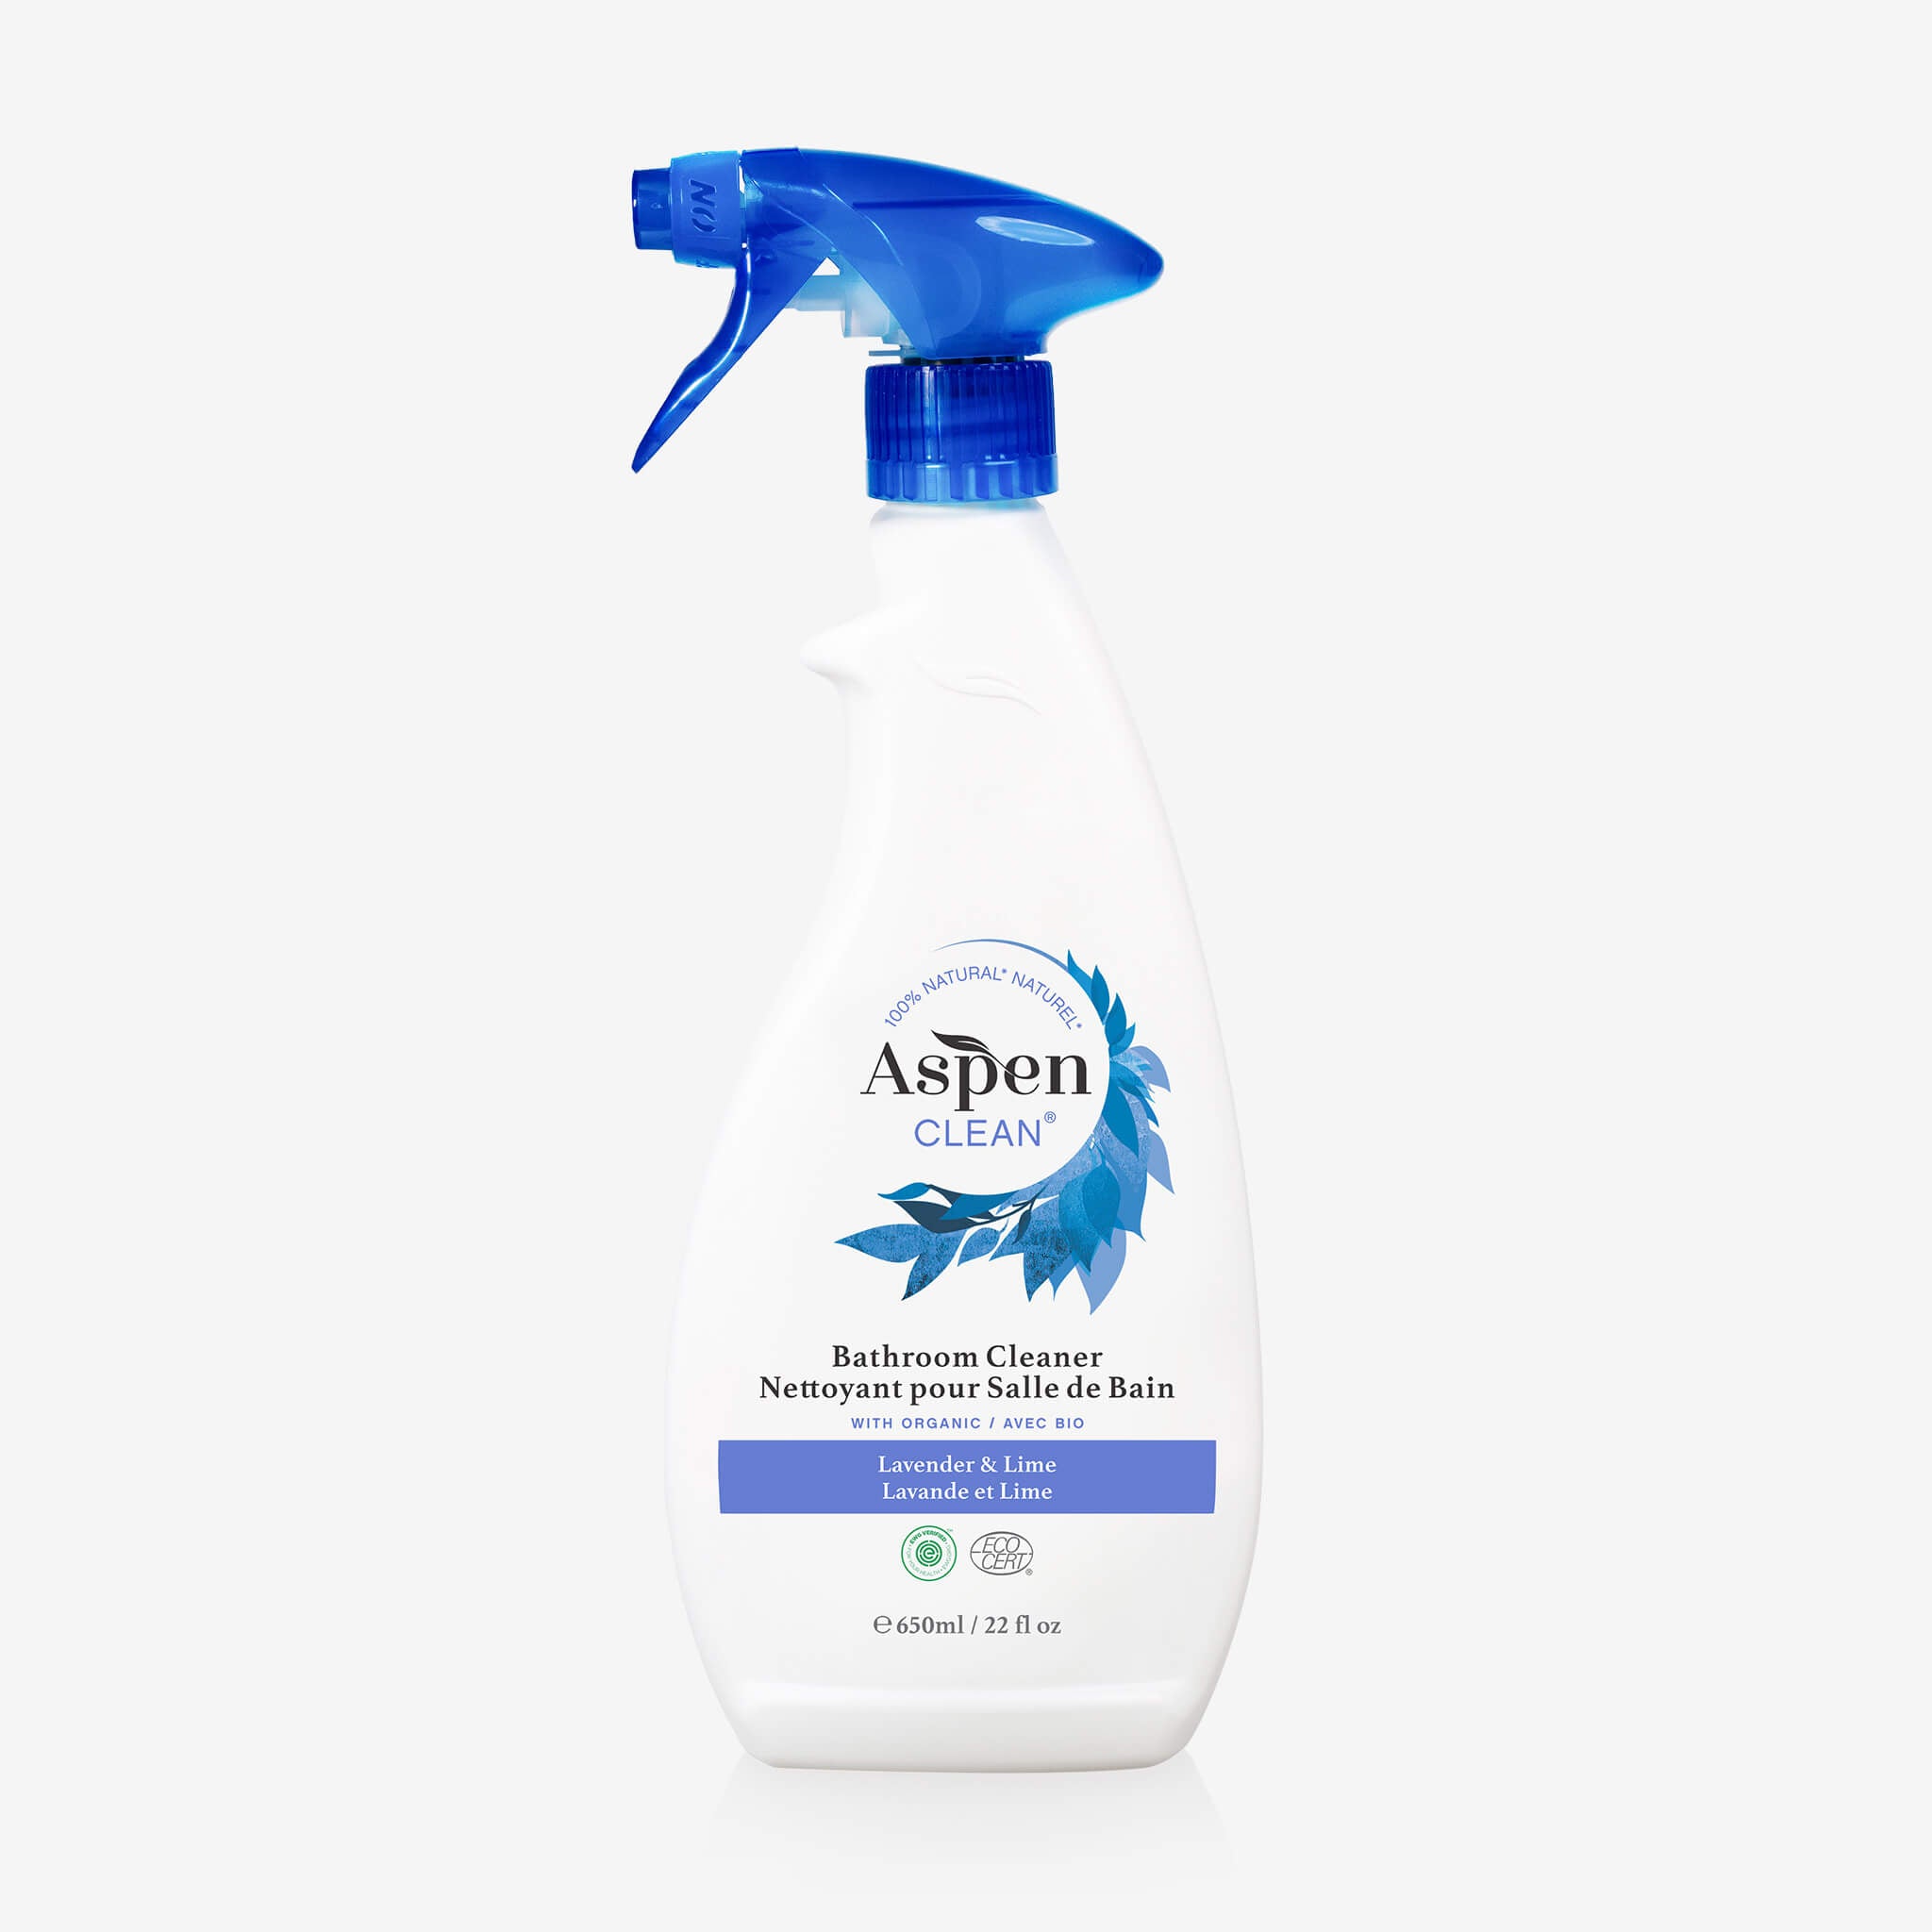 Best 7 Bathroom Cleaning Supplies Top Eco-friendly Bathroom Cleaning  Products 